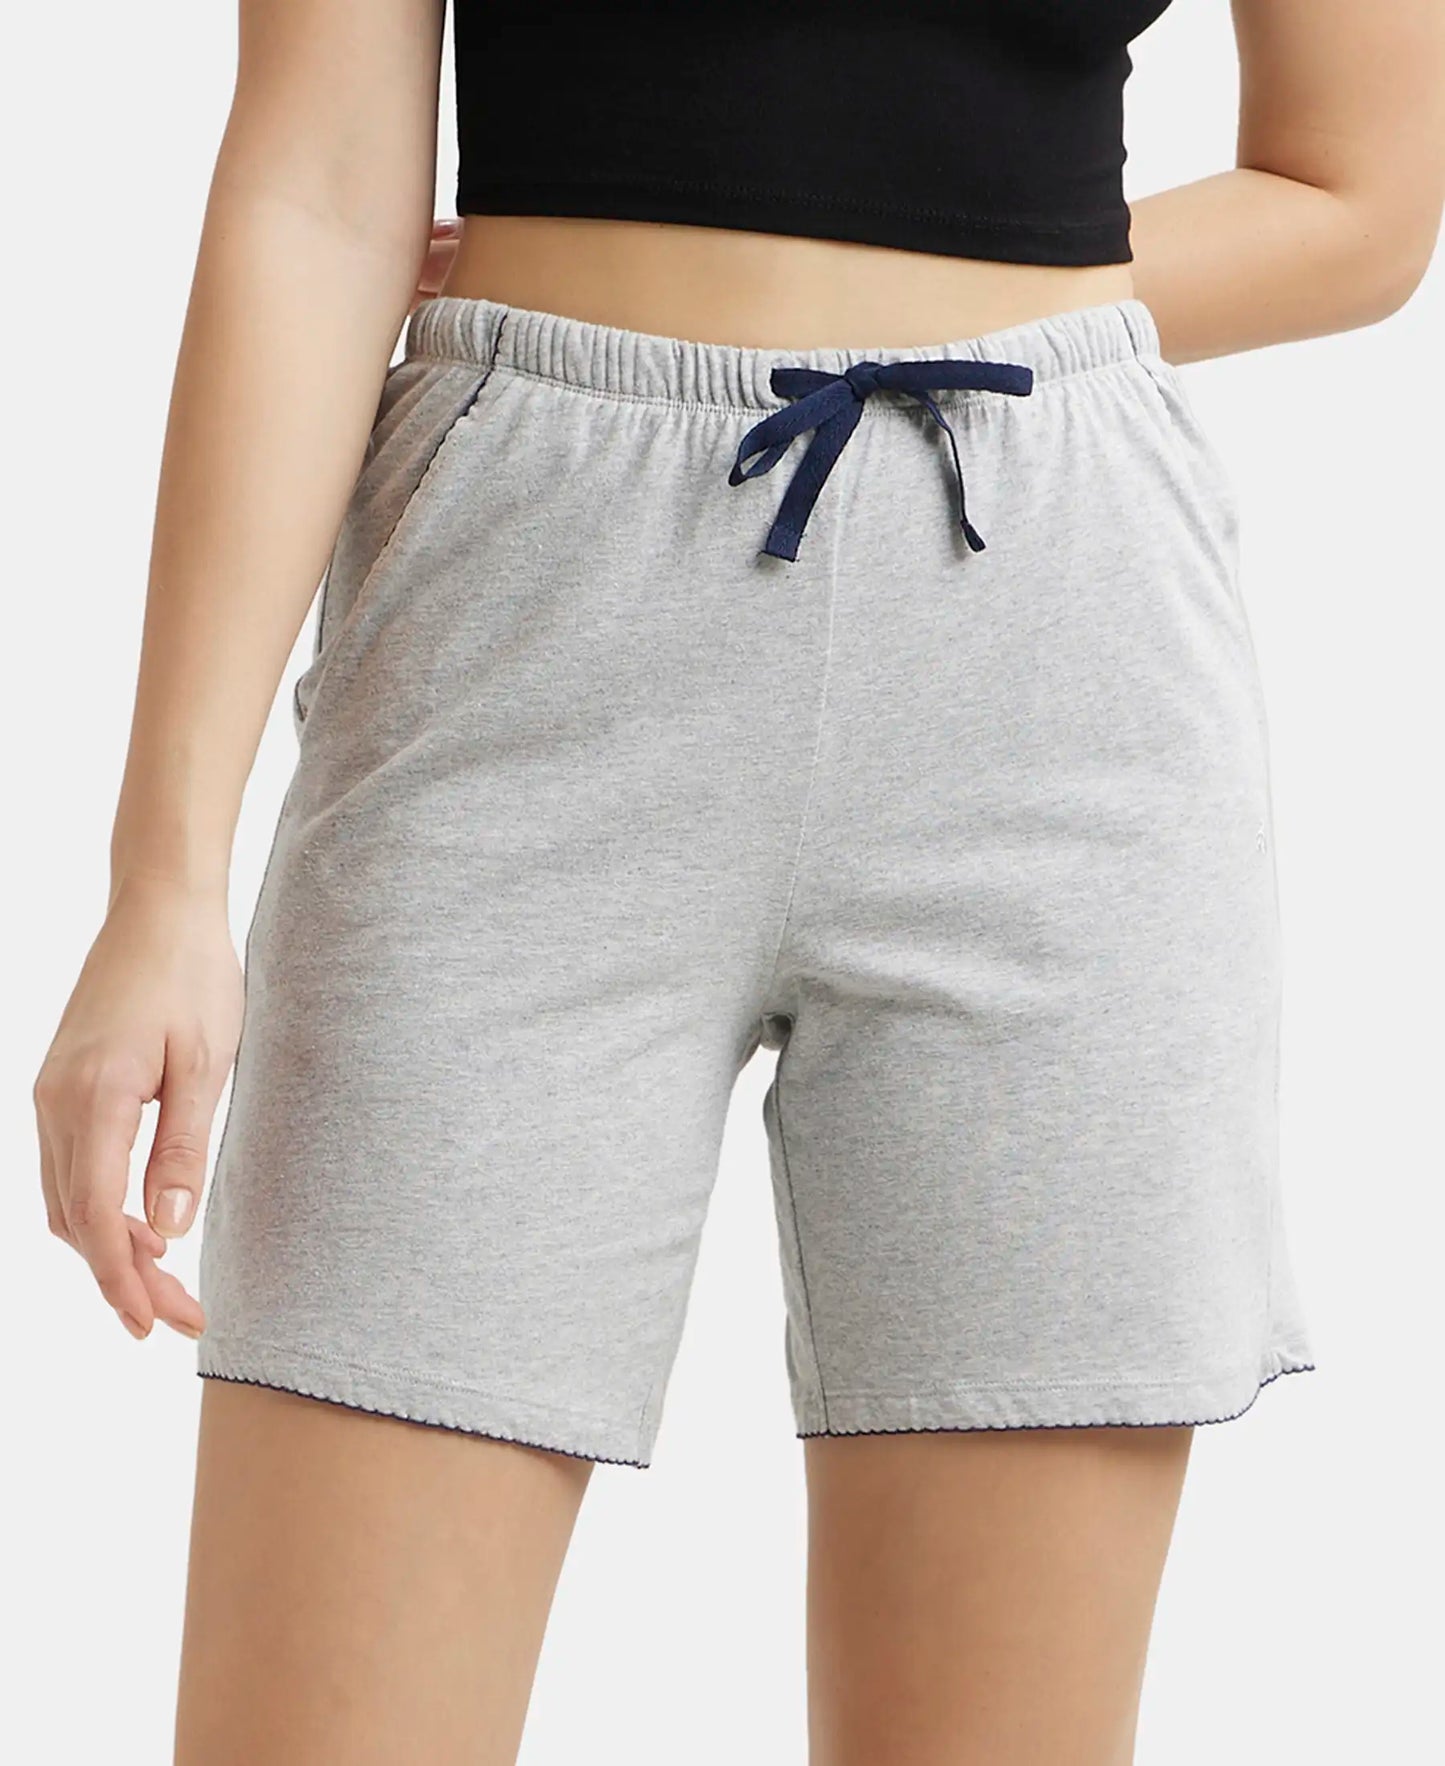 Super Combed Cotton Relaxed Fit Sleep Shorts with Convenient Side Pockets - Light Grey Melange-5